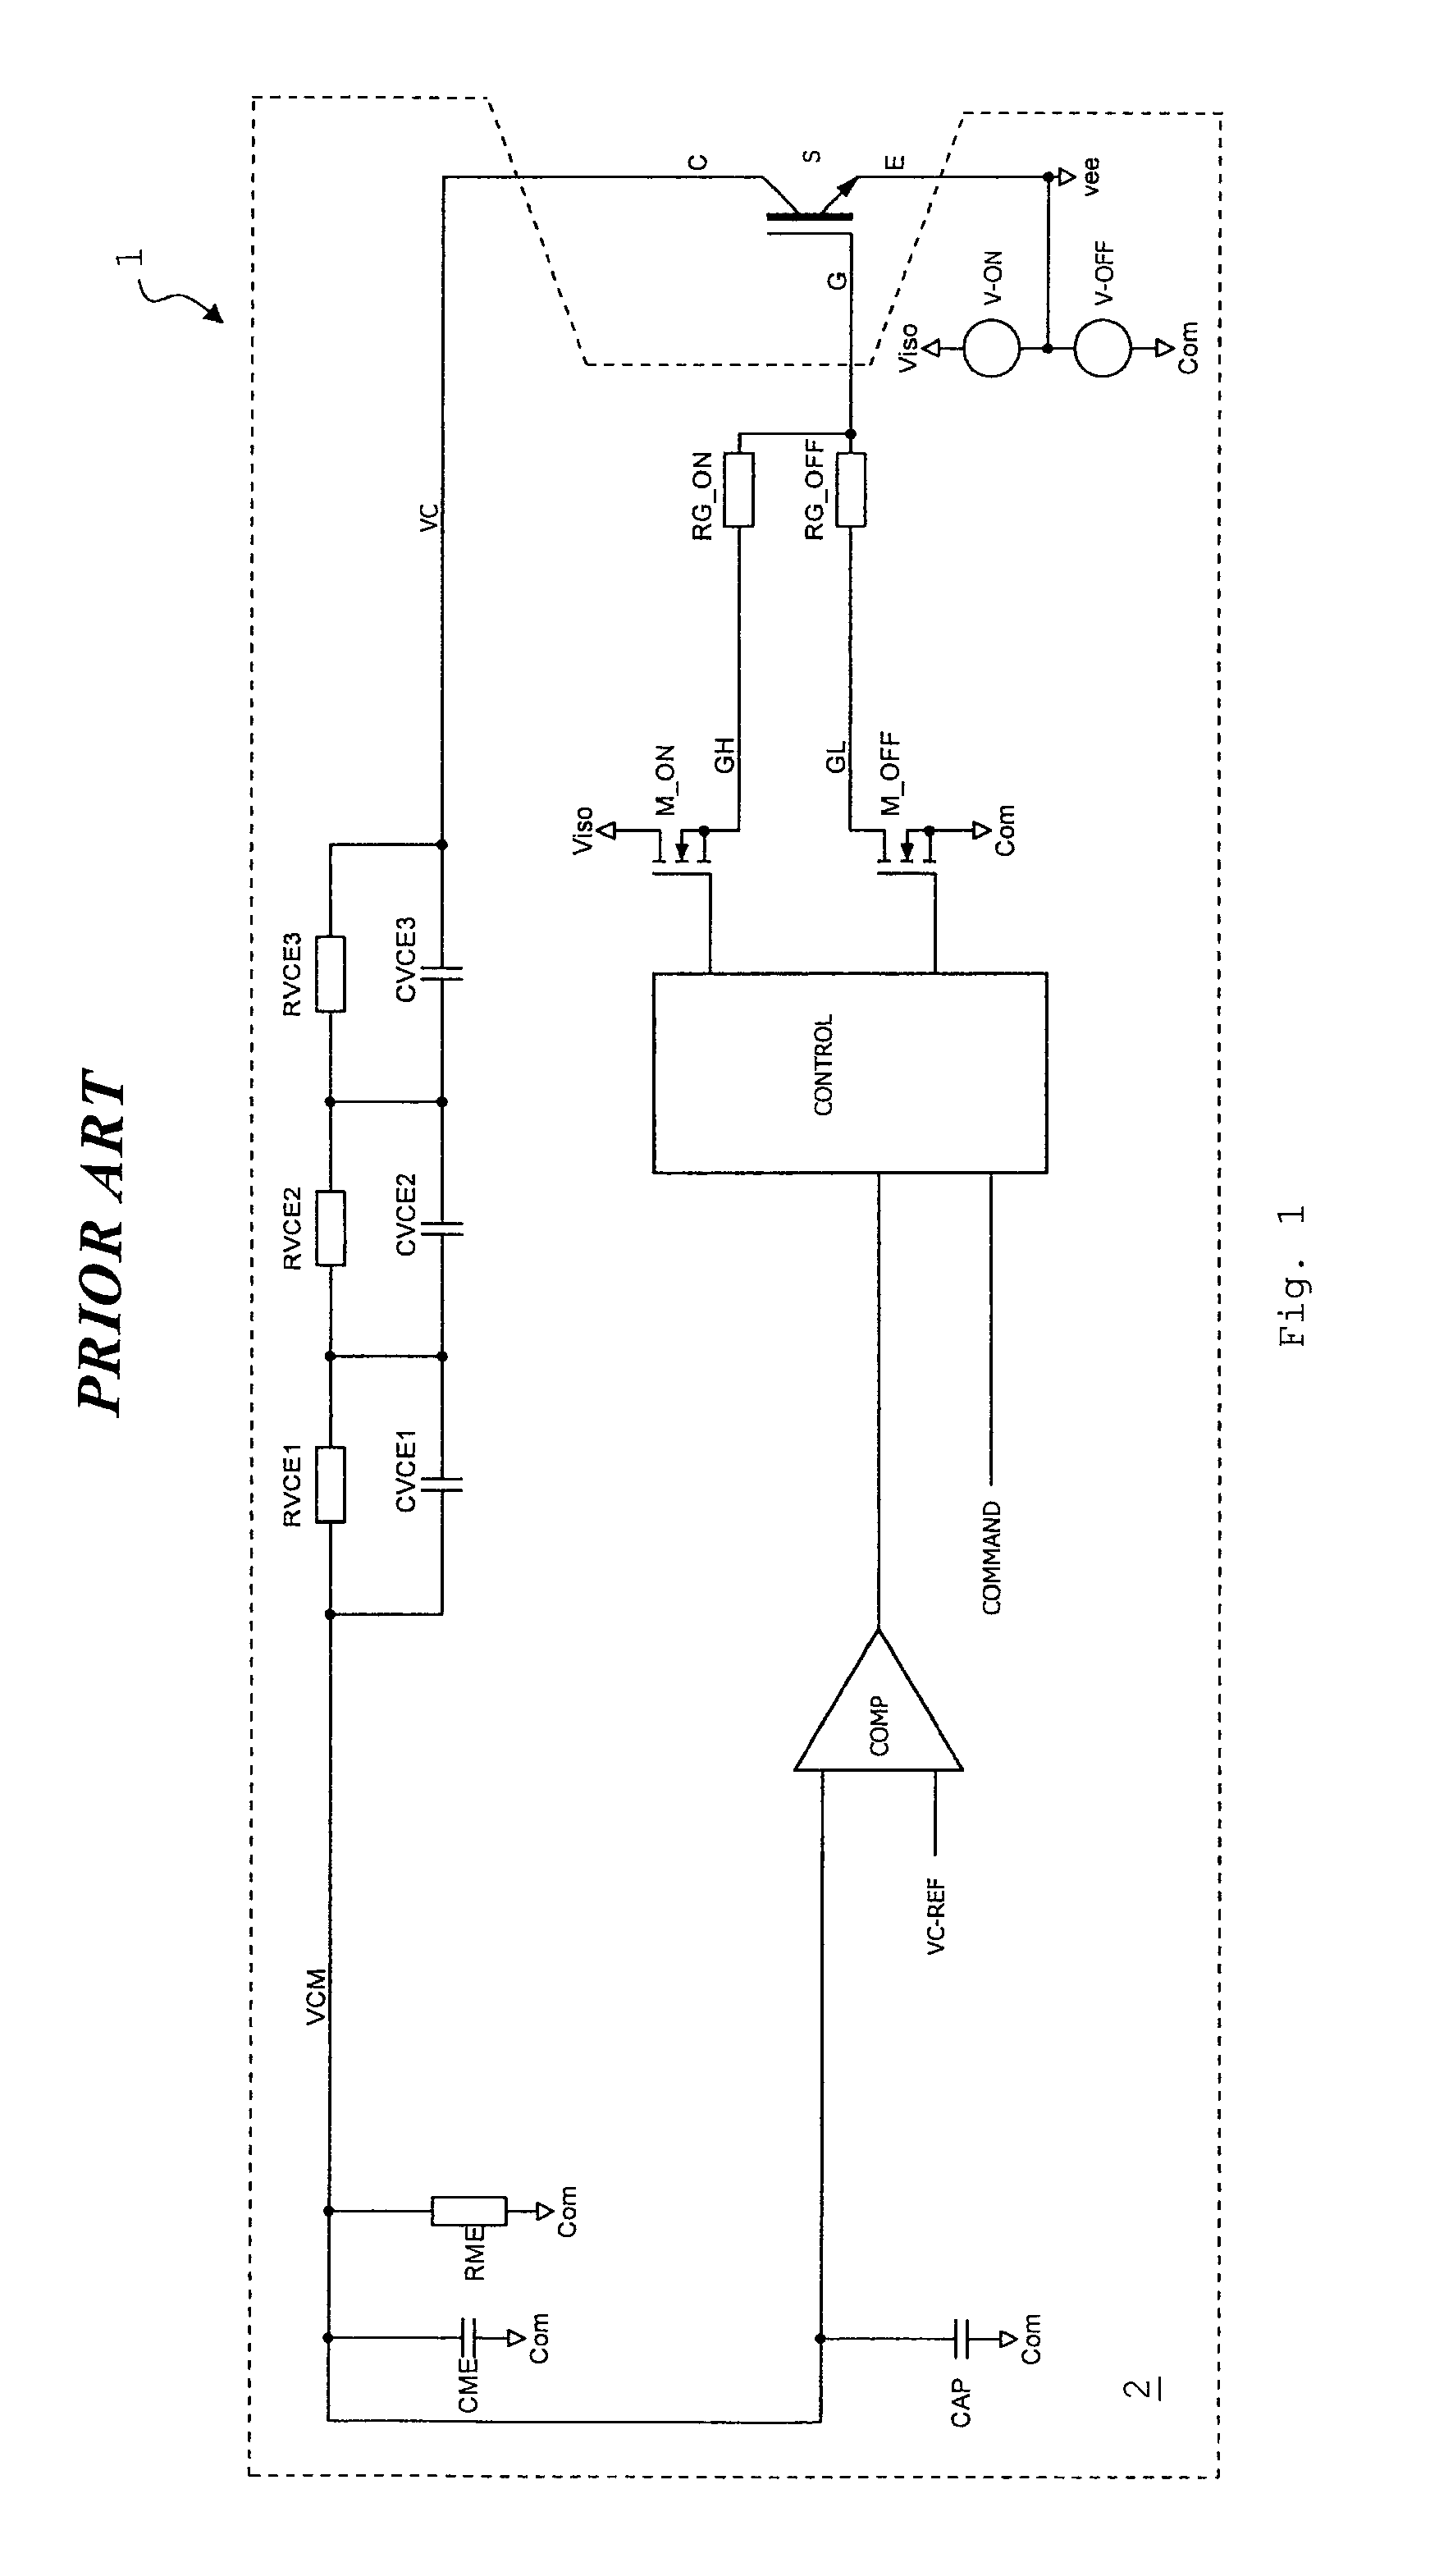 Control circuit and method for controlling a power semiconductor switch